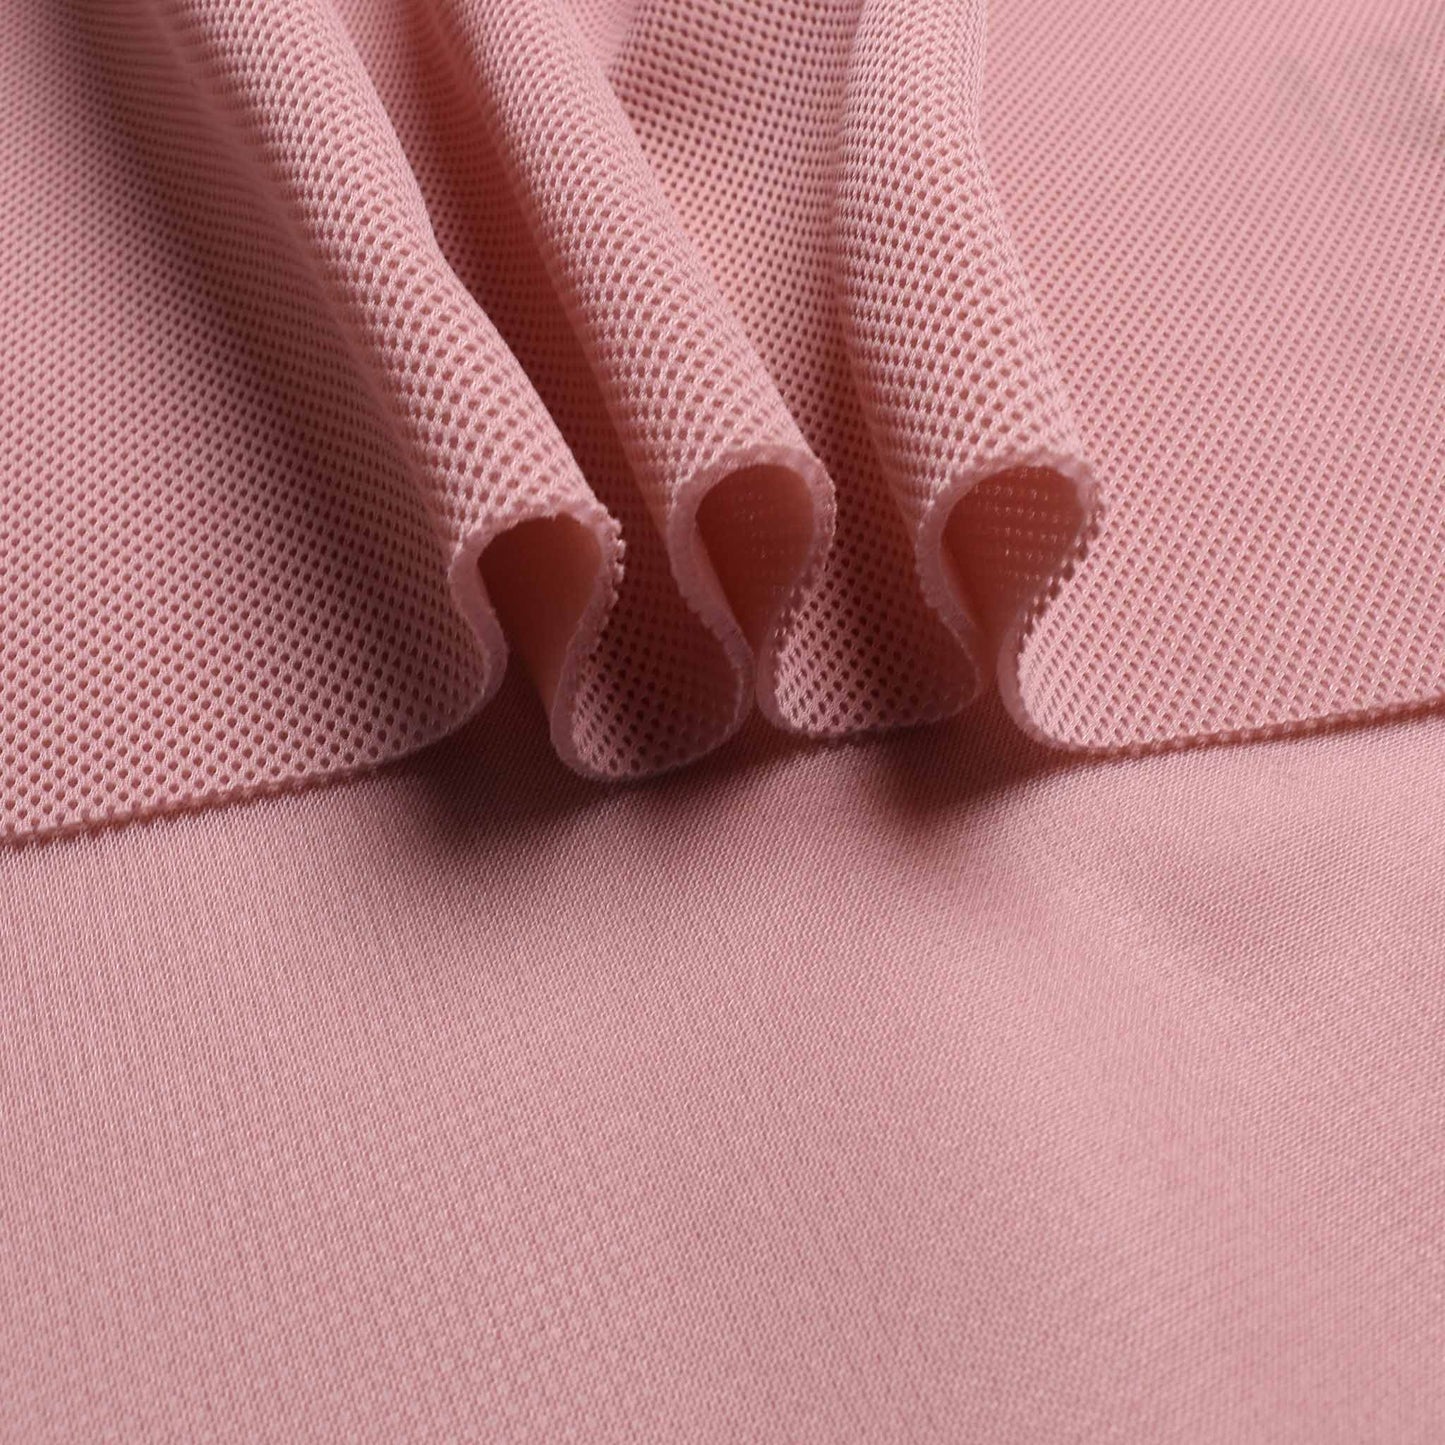 pink airtex mesh 3D spacer sports fabric for dressmaking